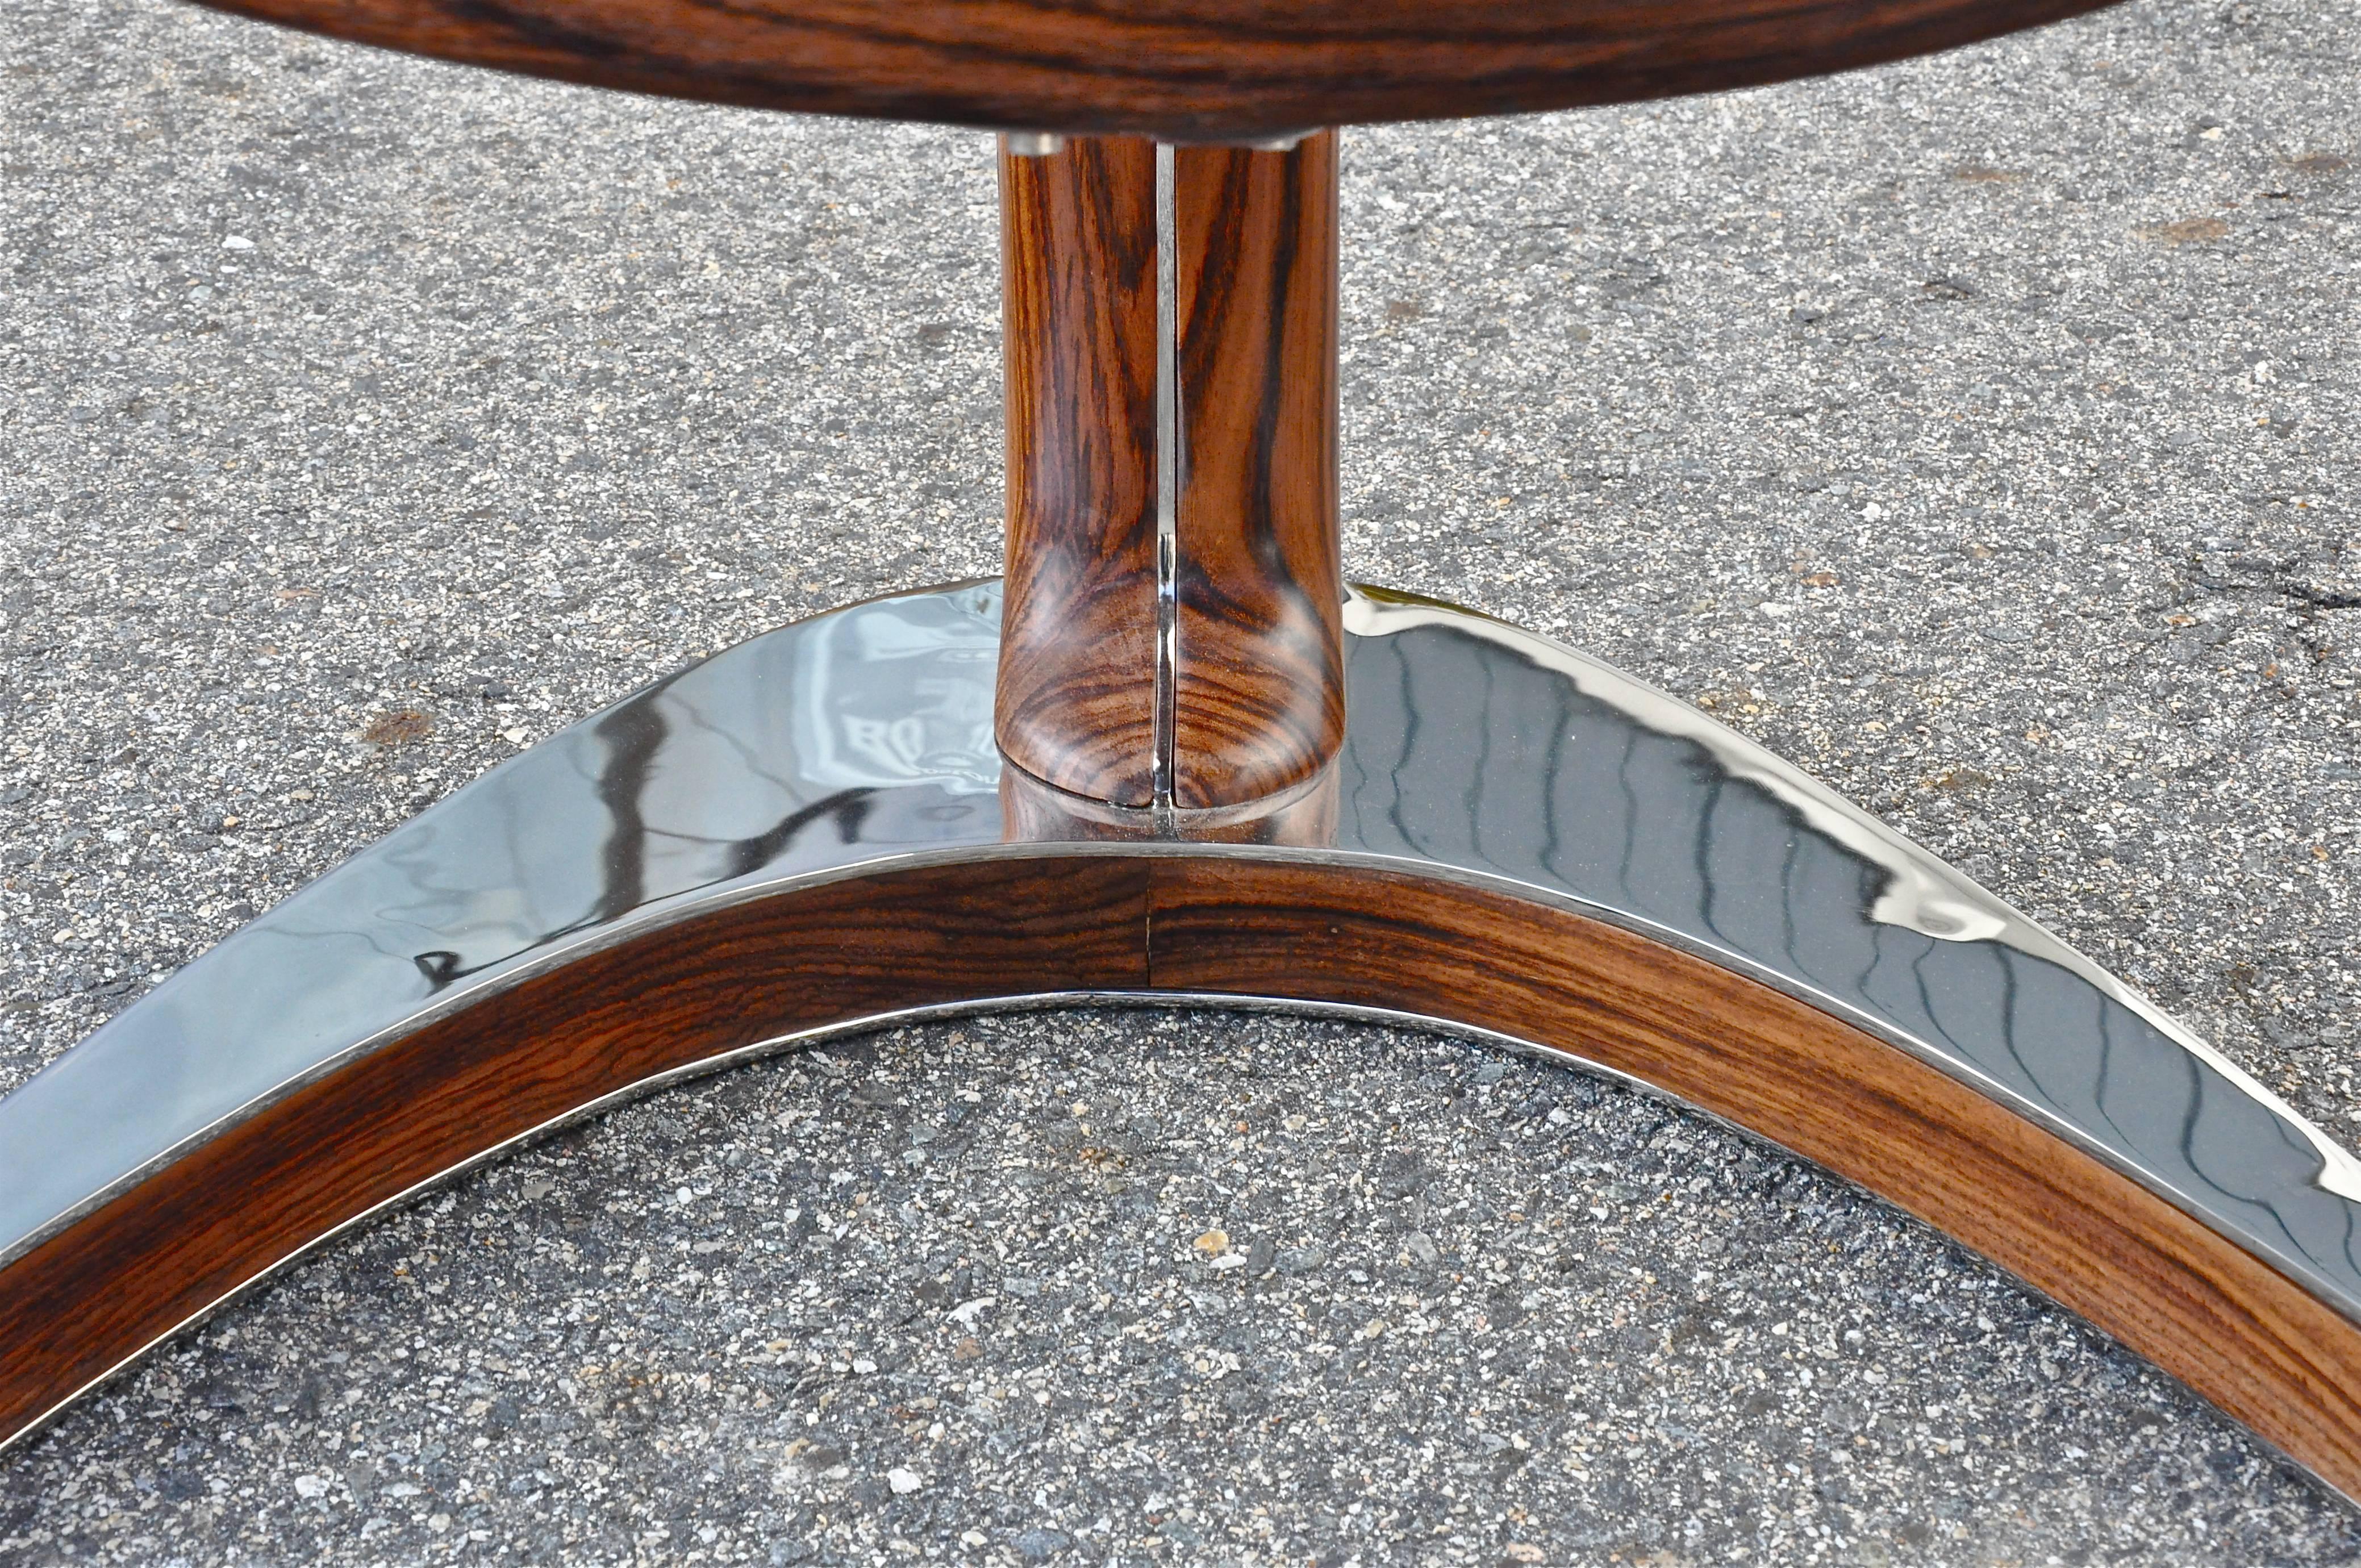 Balinese Rosewood and Polished Stainless Steel Chair By Bruno Helgen